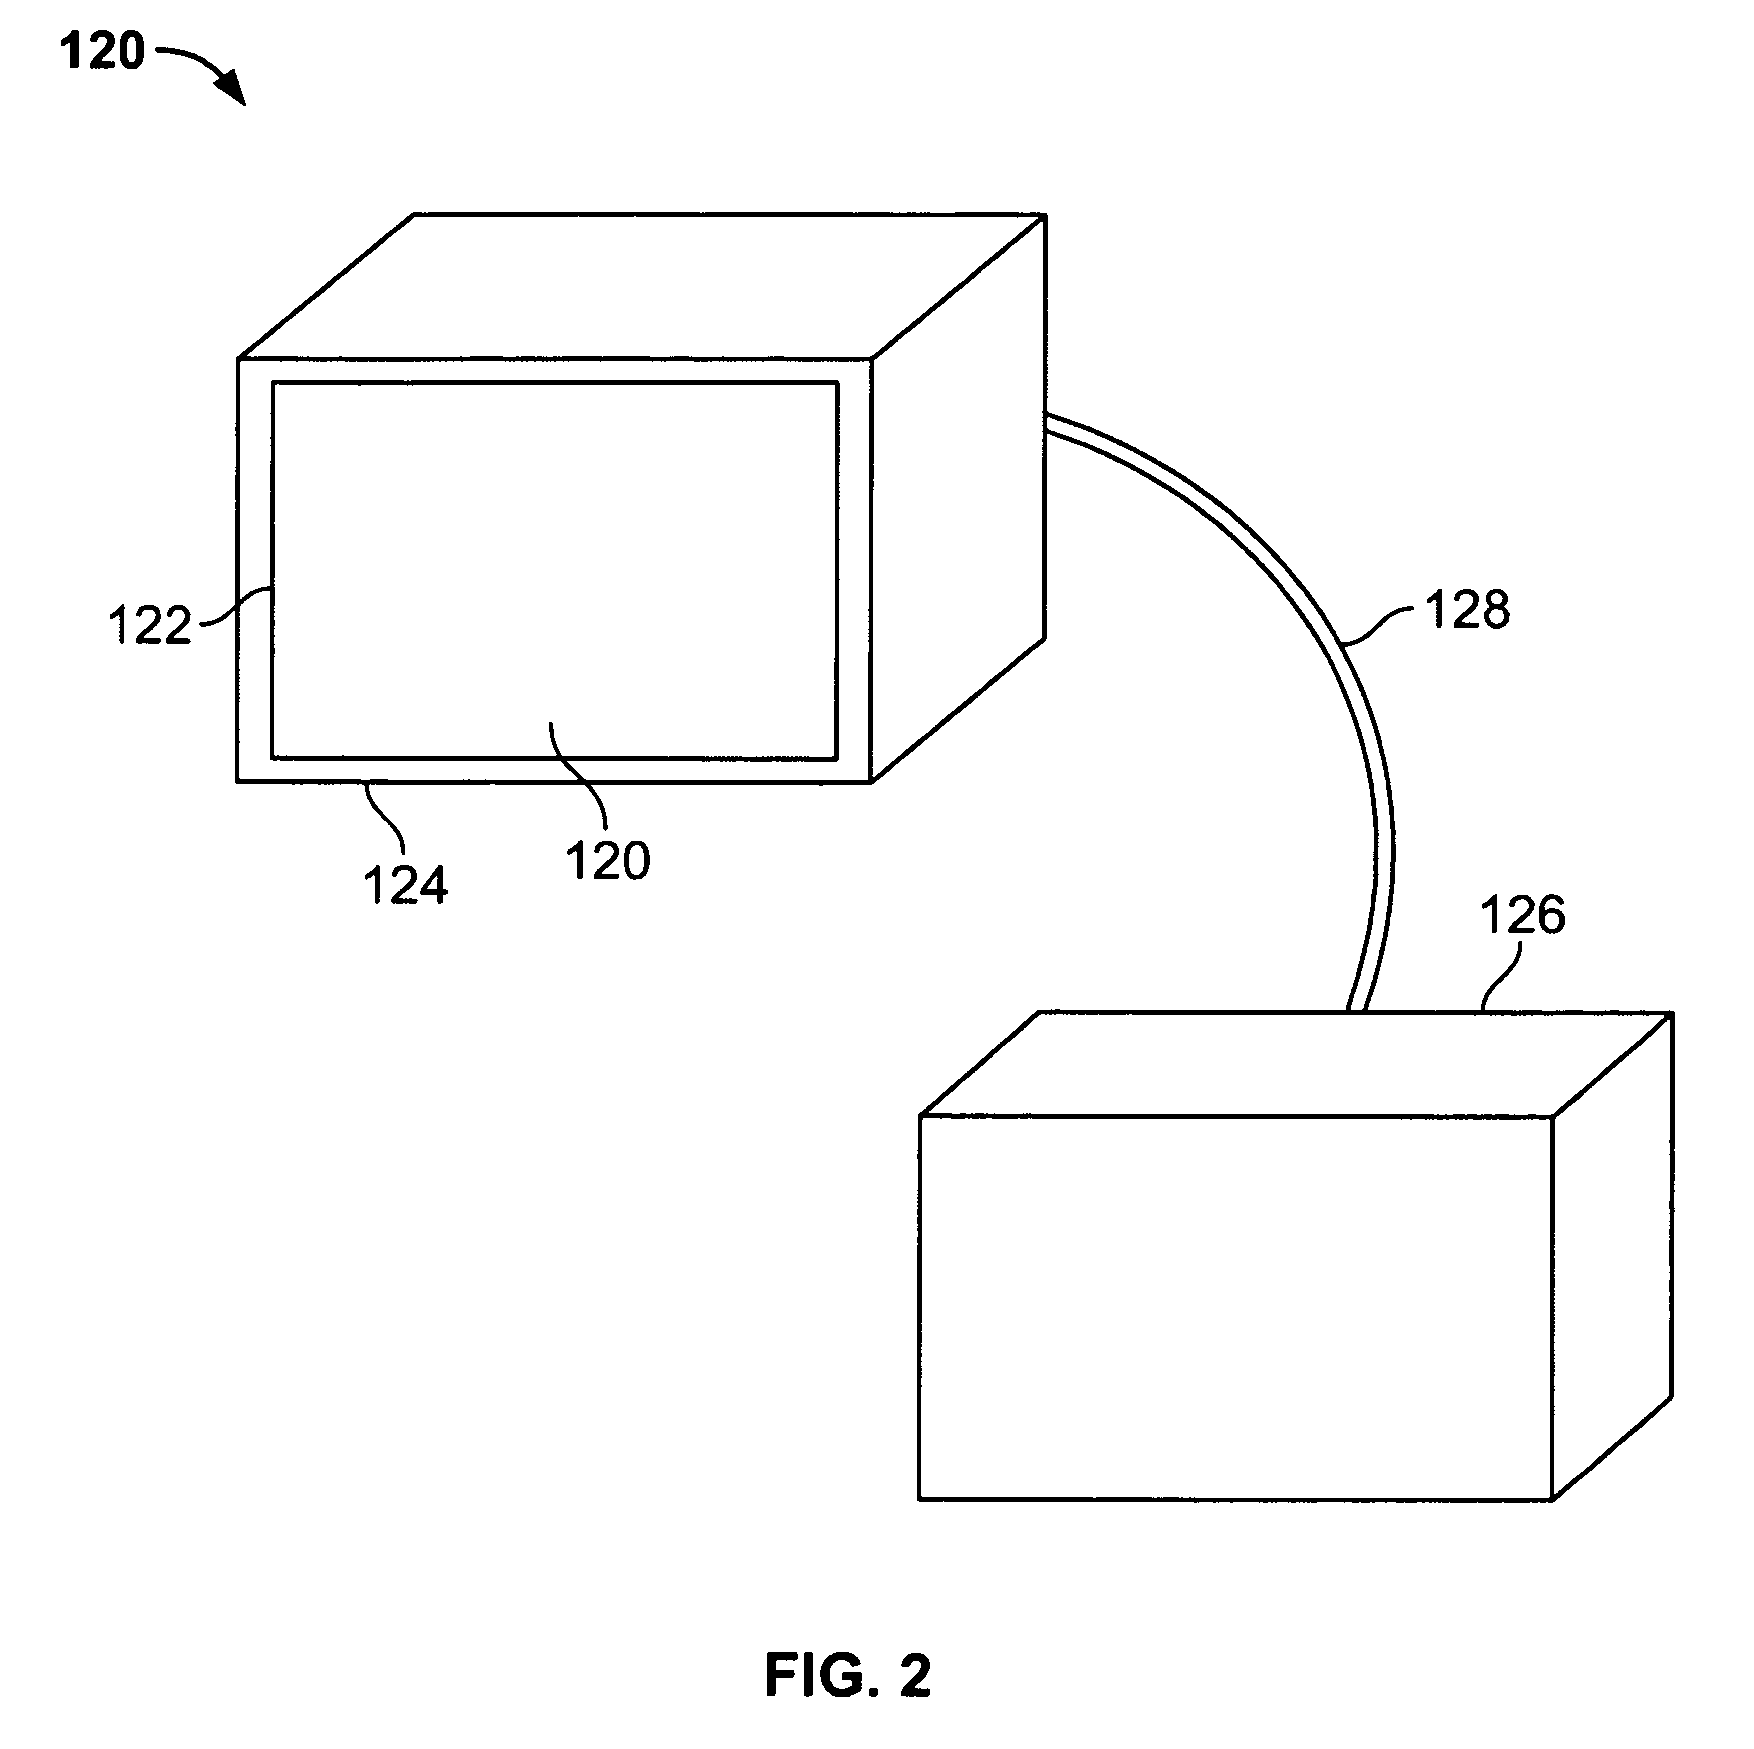 Auto-gain switching module for acoustic touch systems